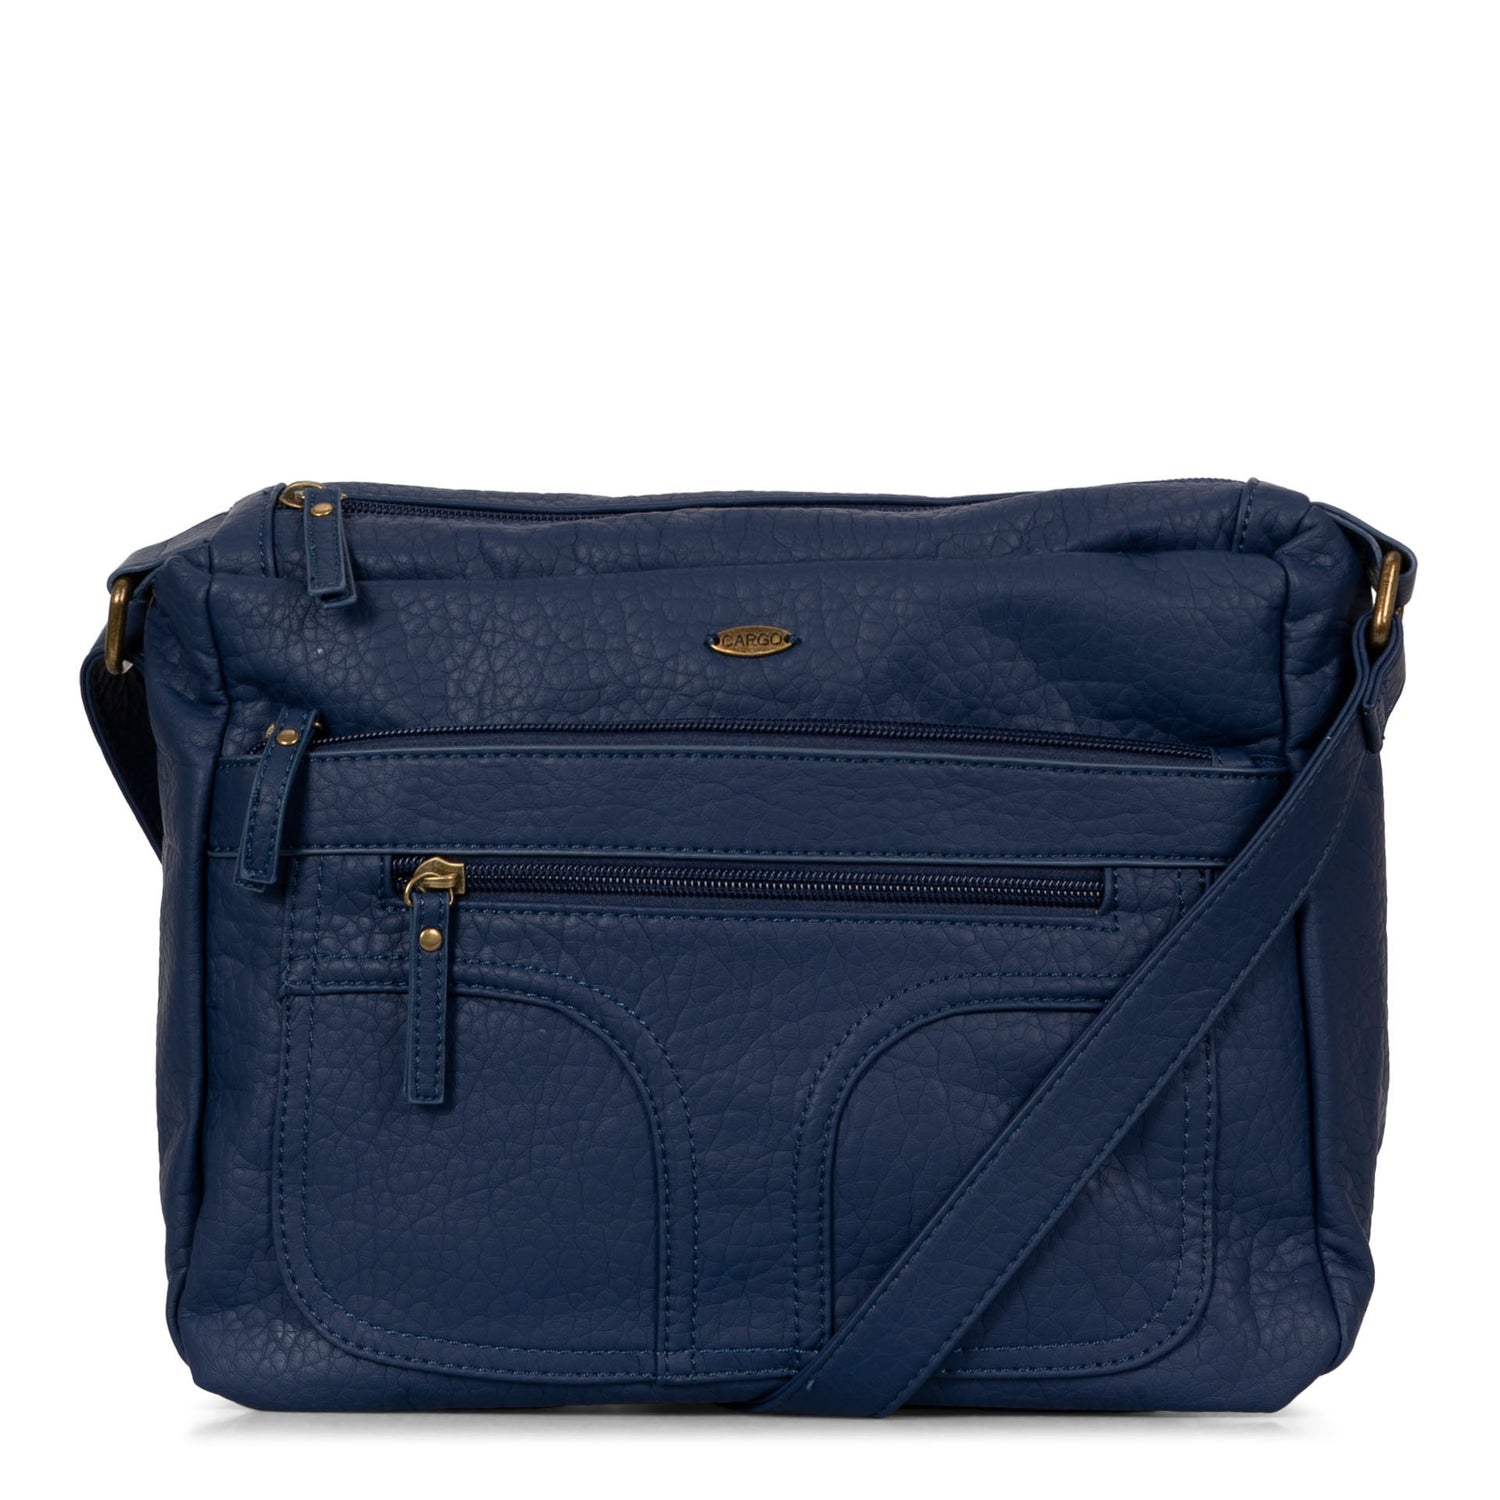 Frontside of a women's navy crossbody bag called Pebbled from the brand Cargo on a white background, showcasing its thin strap.